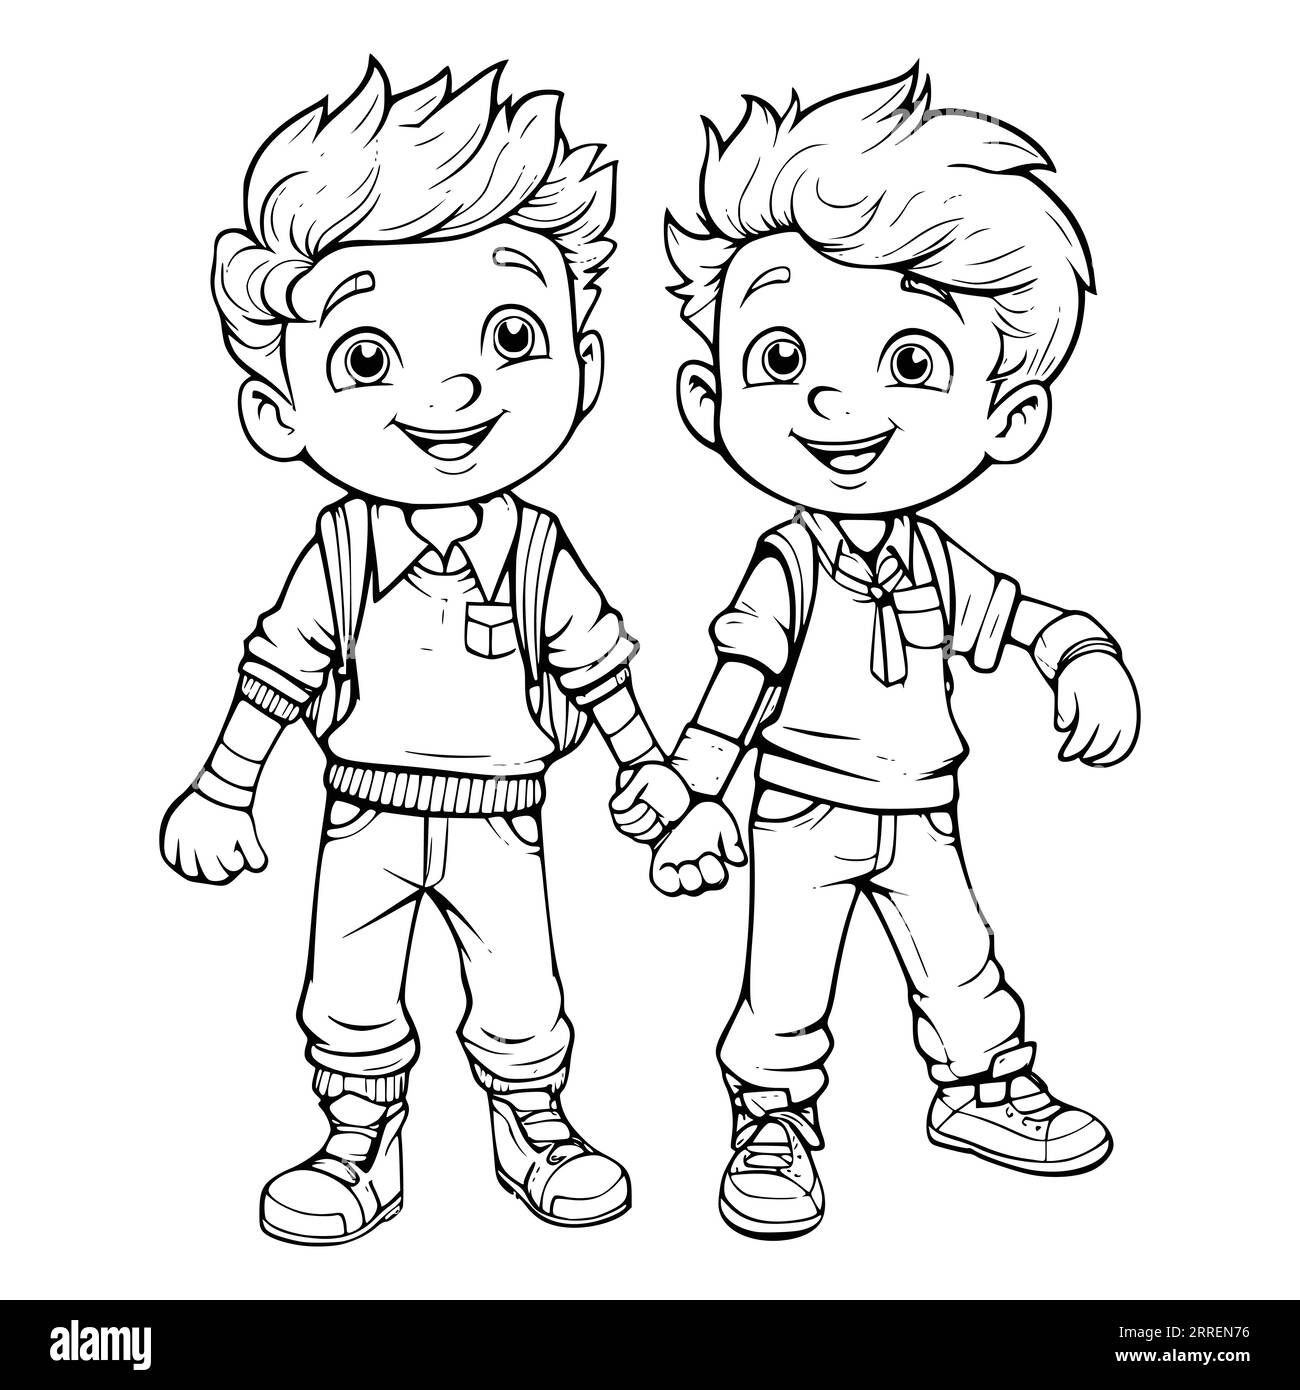 Cheerful Little Boys Coloring Page for Kids Stock Vector